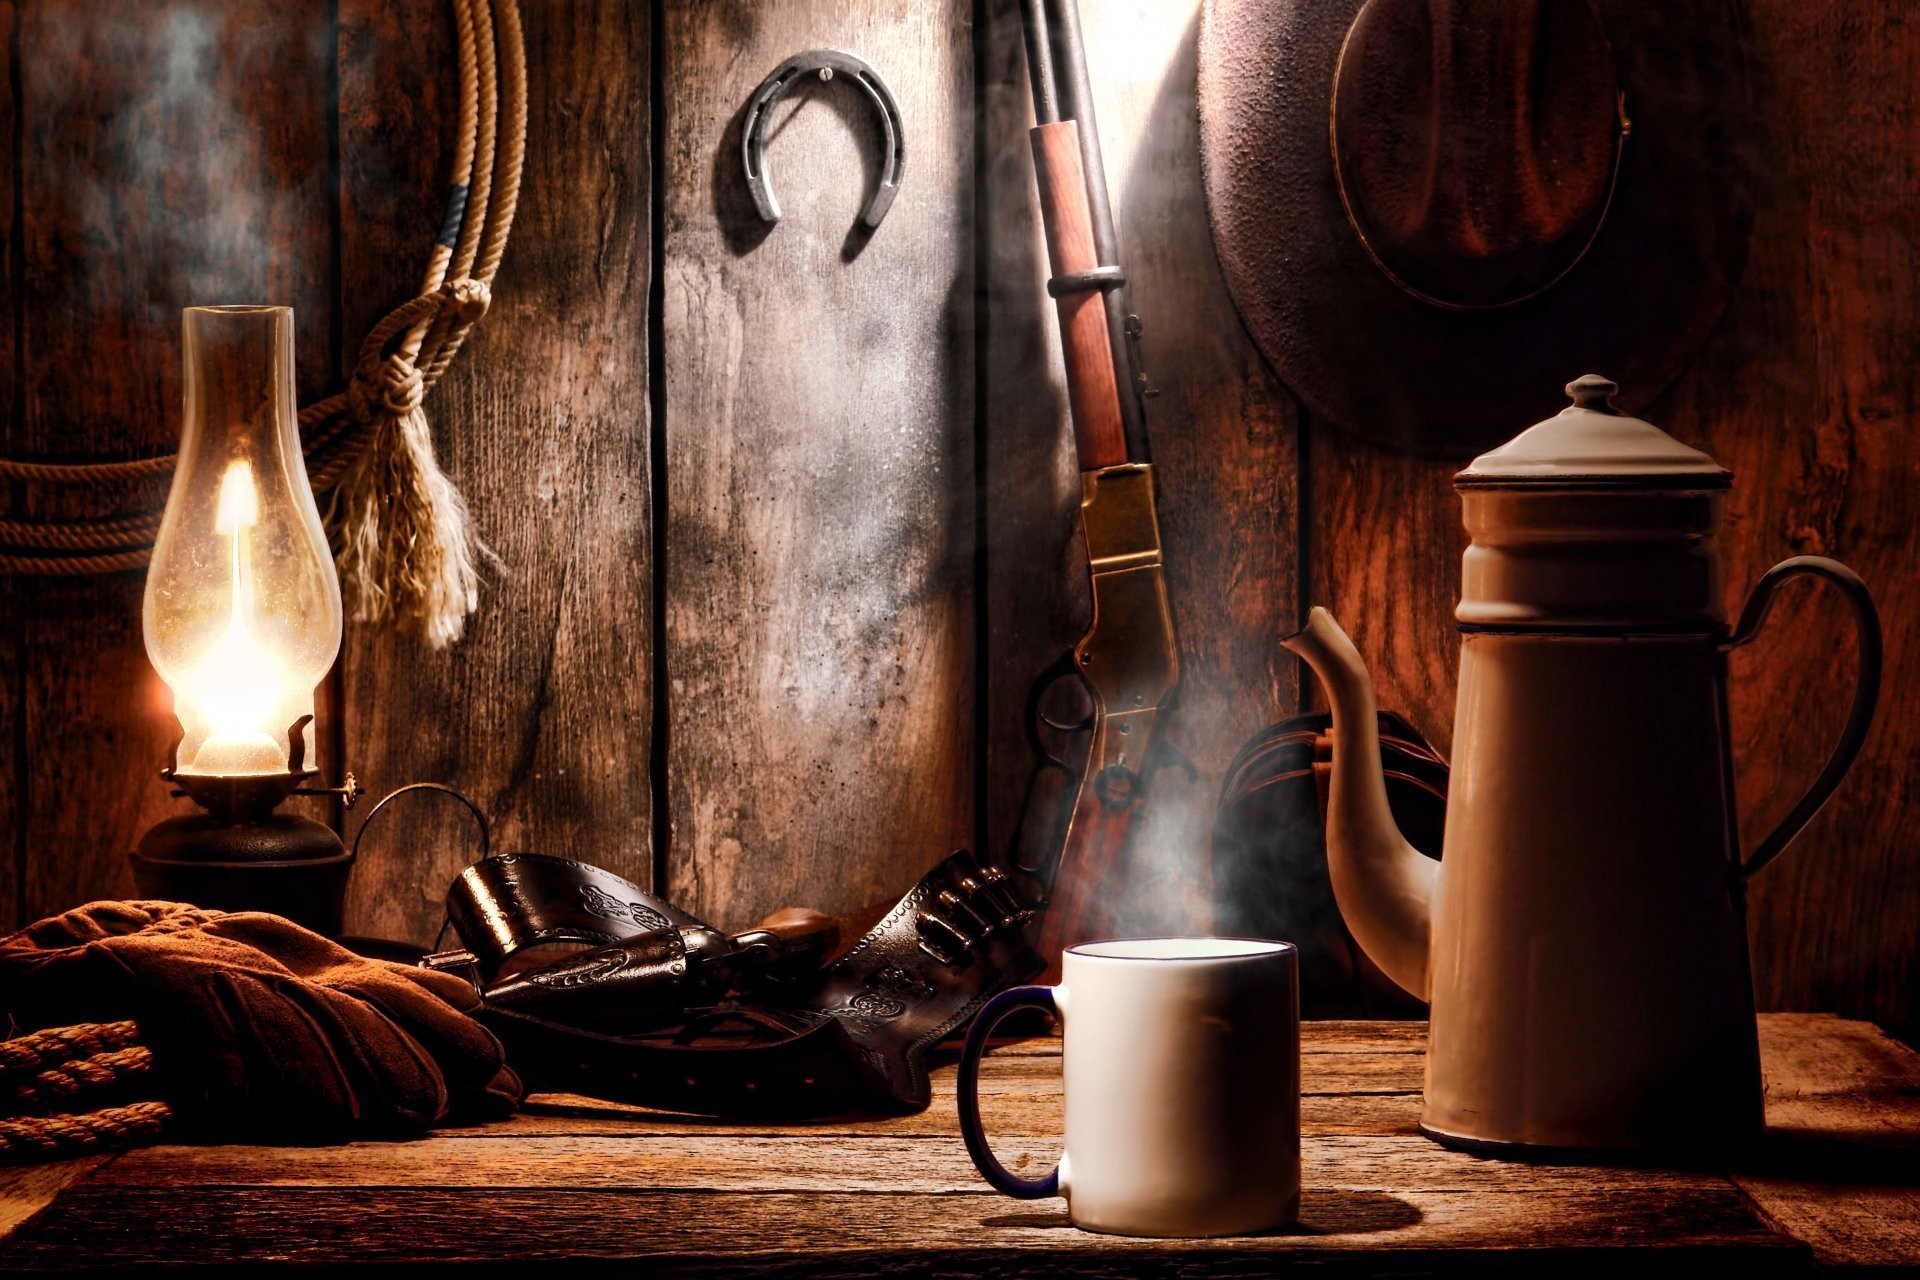 1920x1280 Cowboy boots and hat wallpaper - photo#24